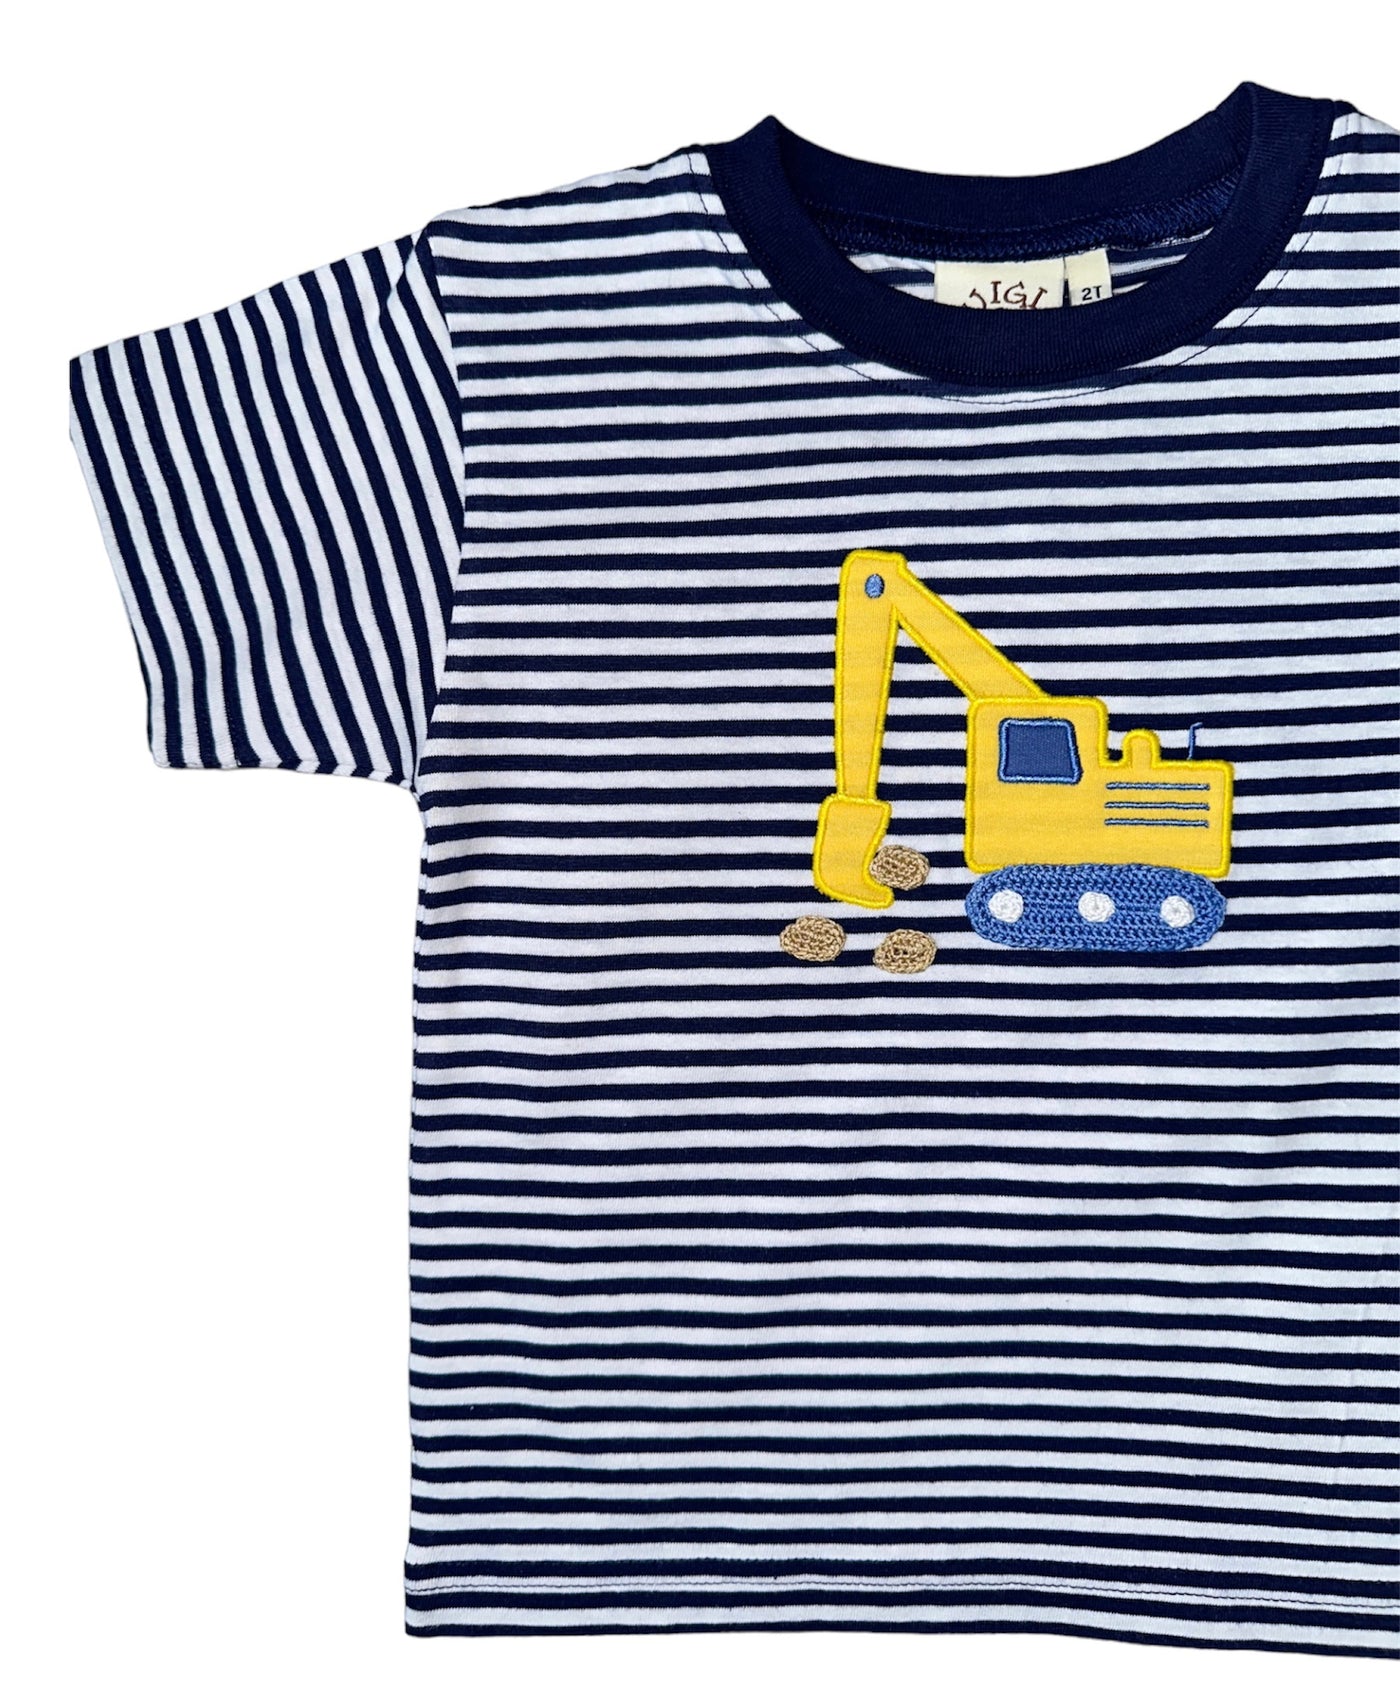 Royal and White Stripe Tee with Backhoe